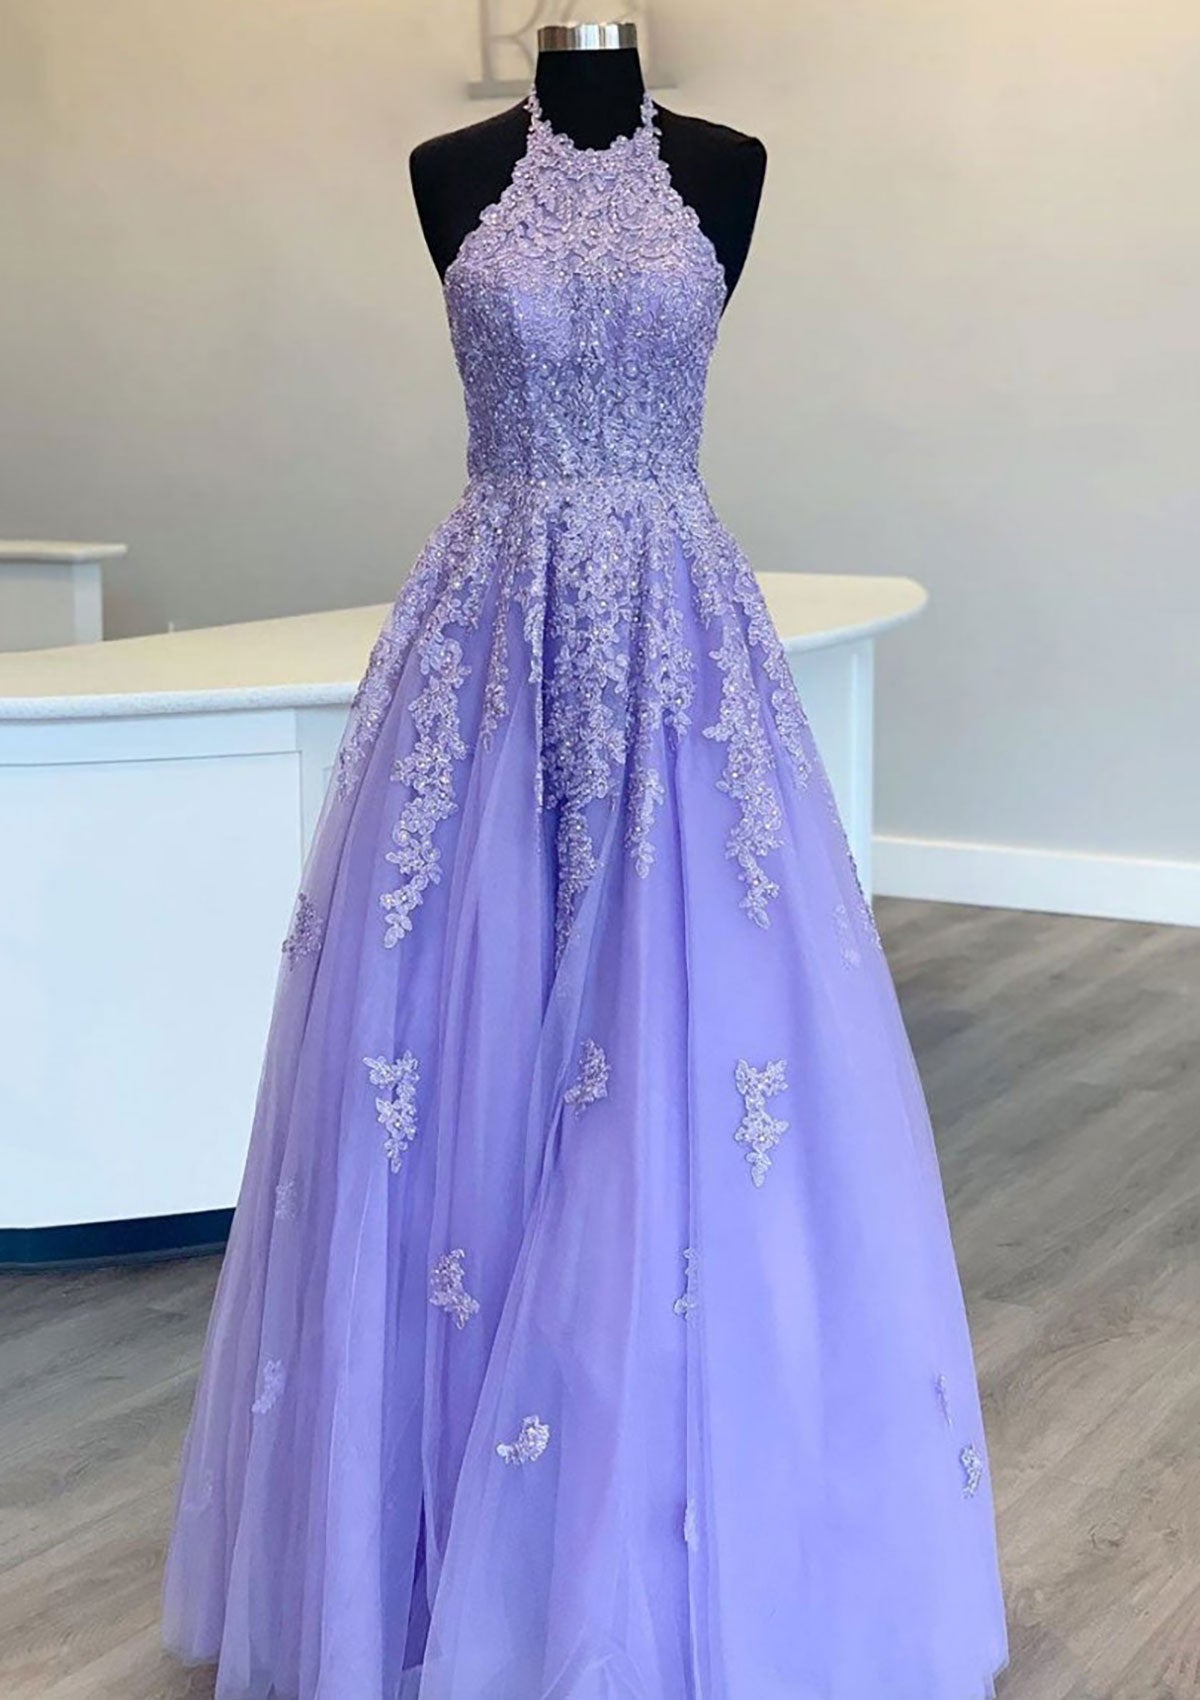 Arleth | Princess Halter Long/Floor-Length Lace Tulle Prom Dress With Appliqued Beading